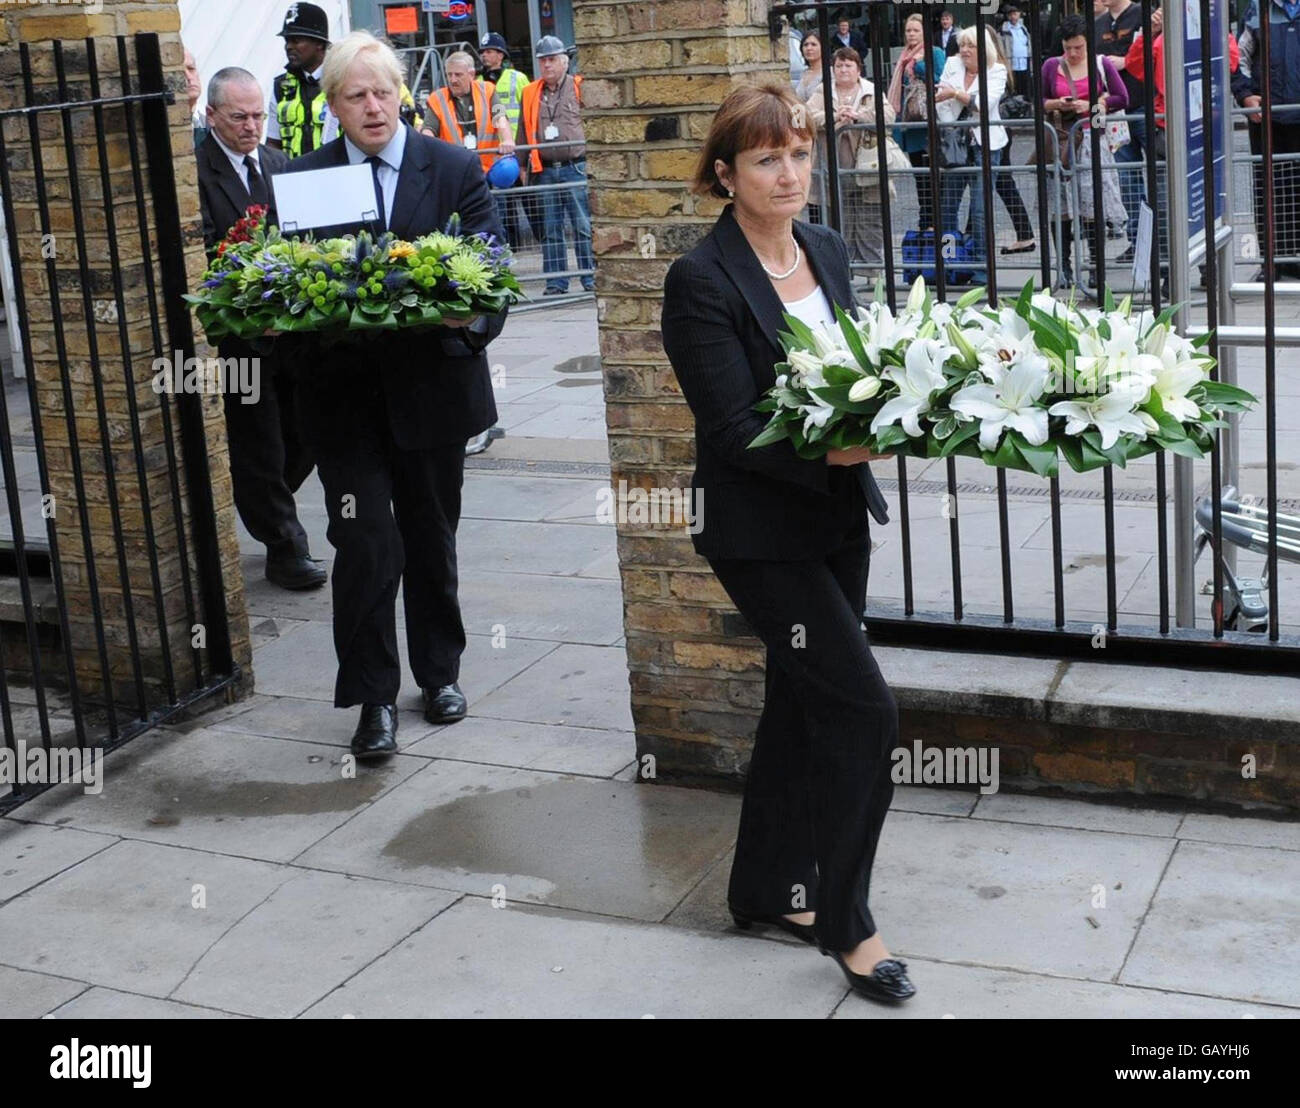 London Mayor Boris Johnson and Tessa Jowell, Minister responsible for Humanitarian Assistance, lay flowers at Kings Cross Station, London, to mark the third anniversary of the July 7 bombings on the London Underground. Stock Photo